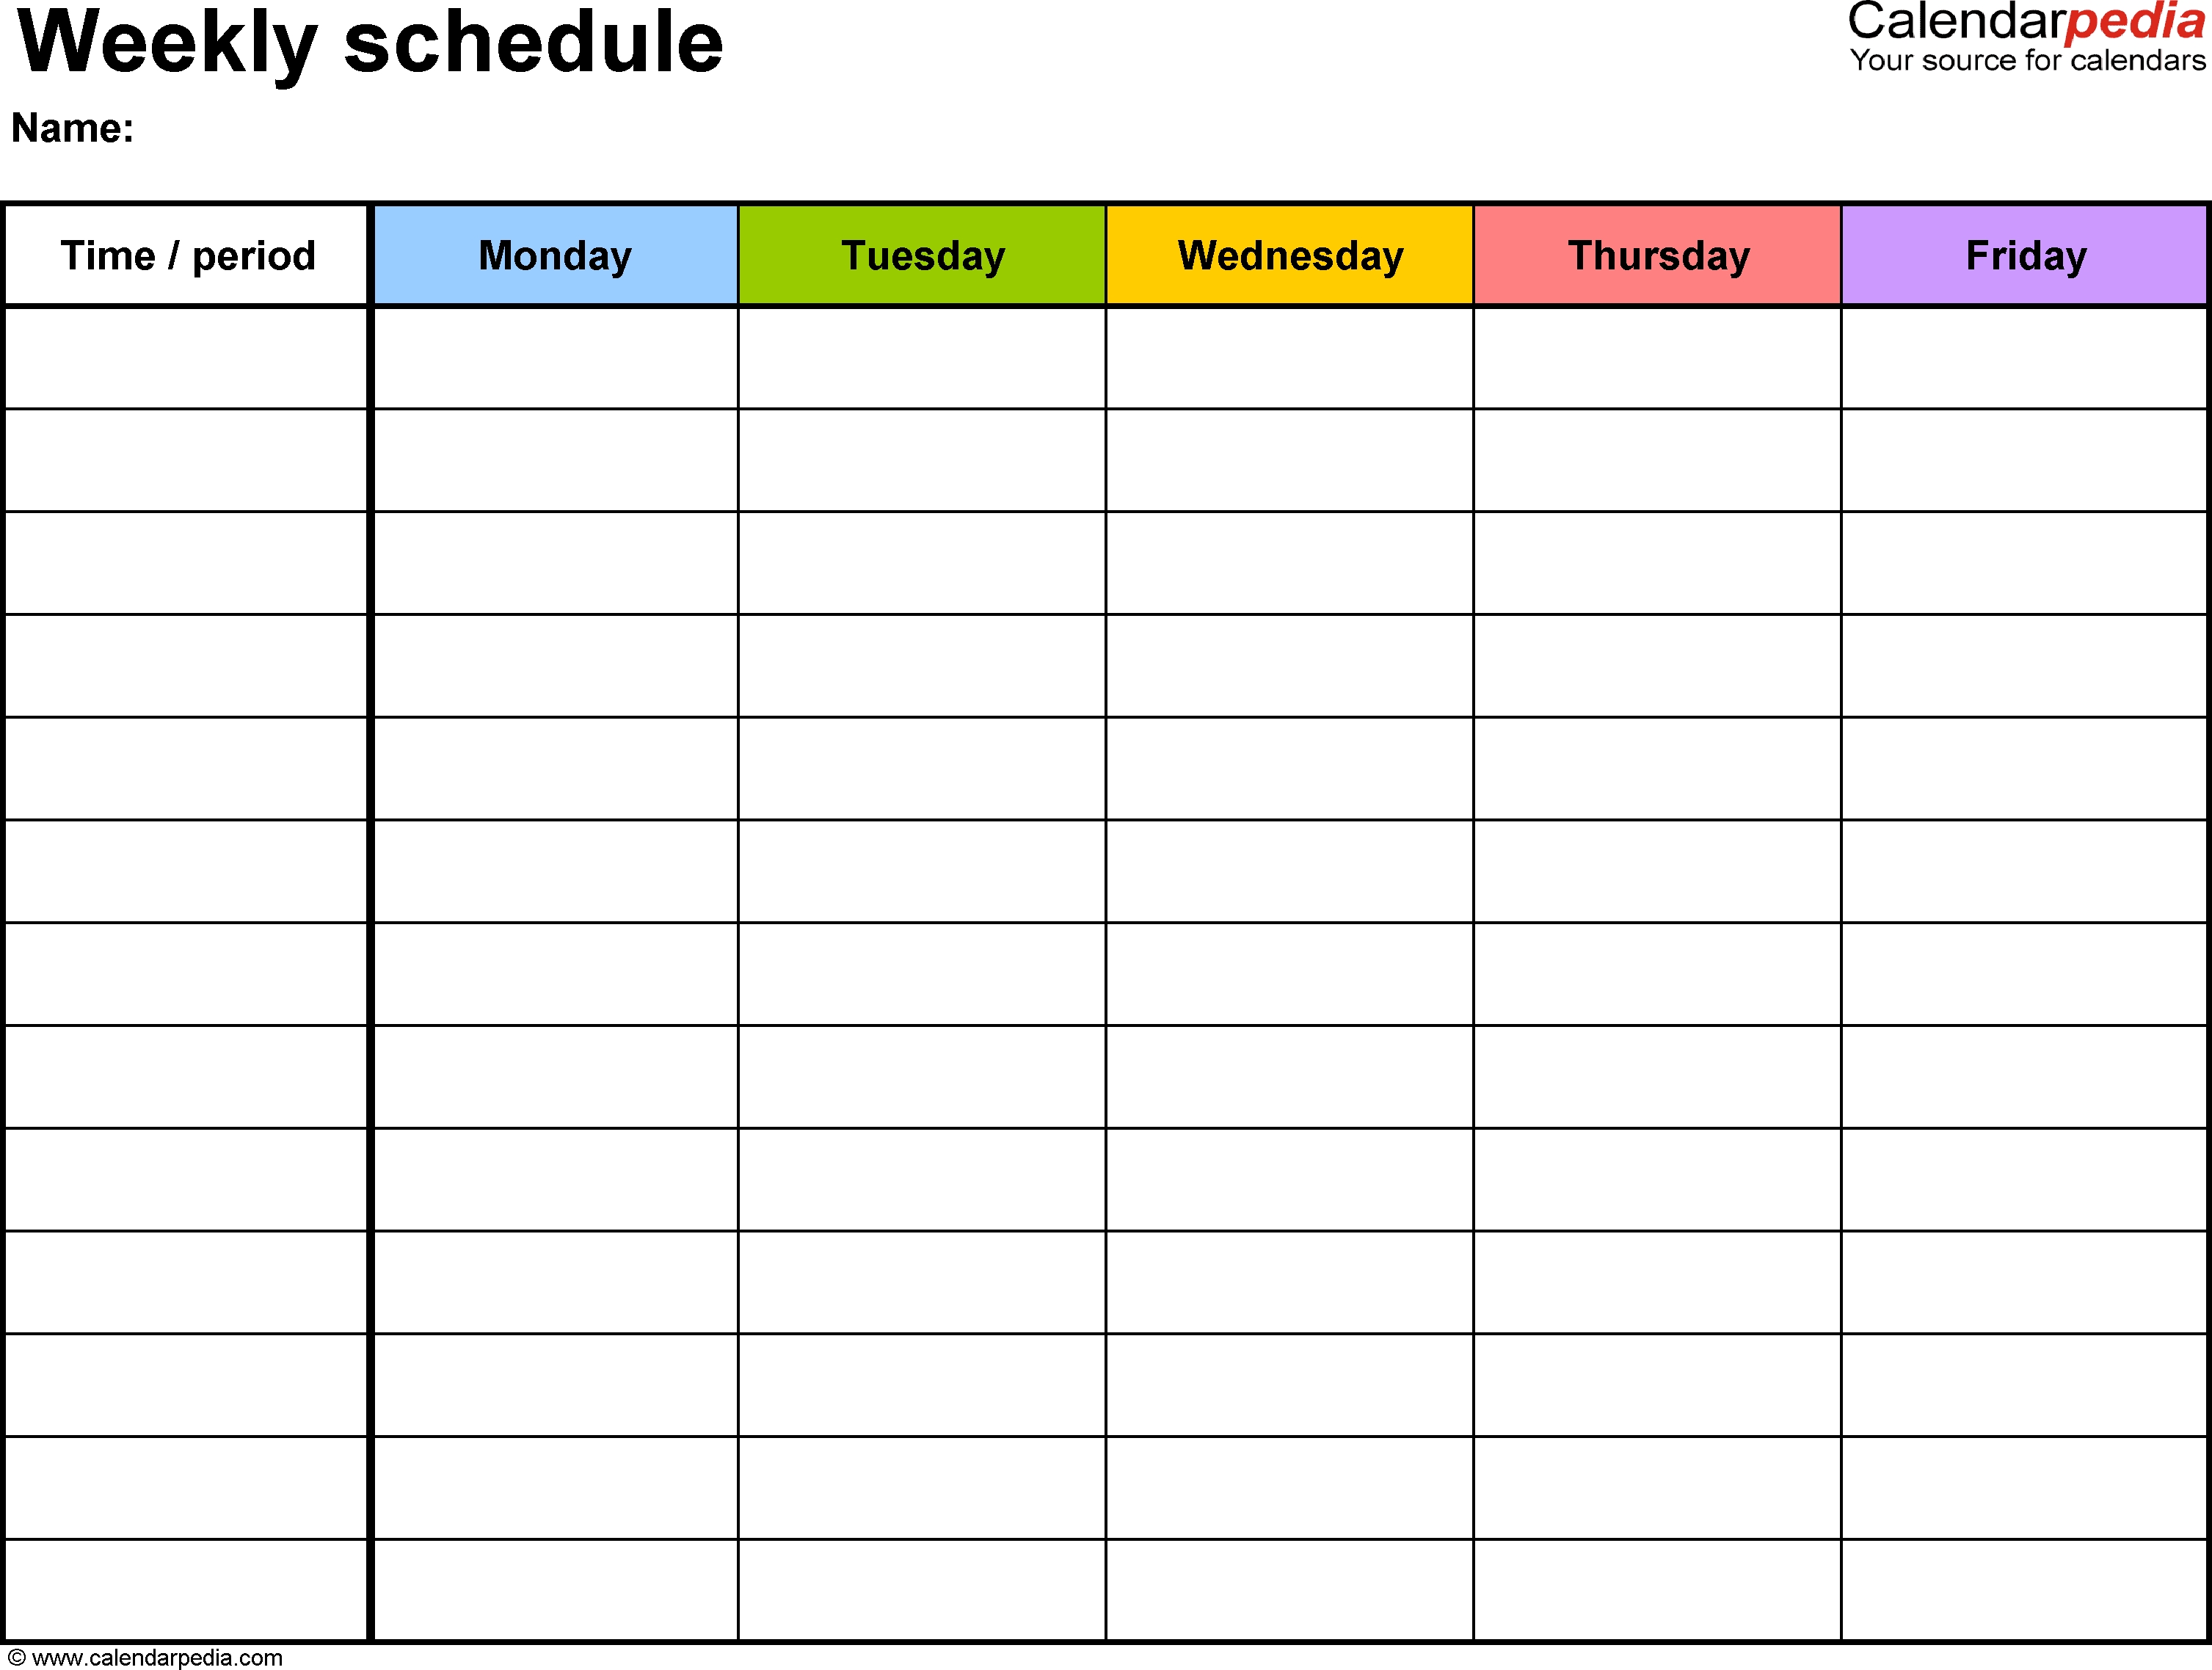 Free Weekly Schedule Templates For Word - 18 Templates in Free Template For Weekly Schedule